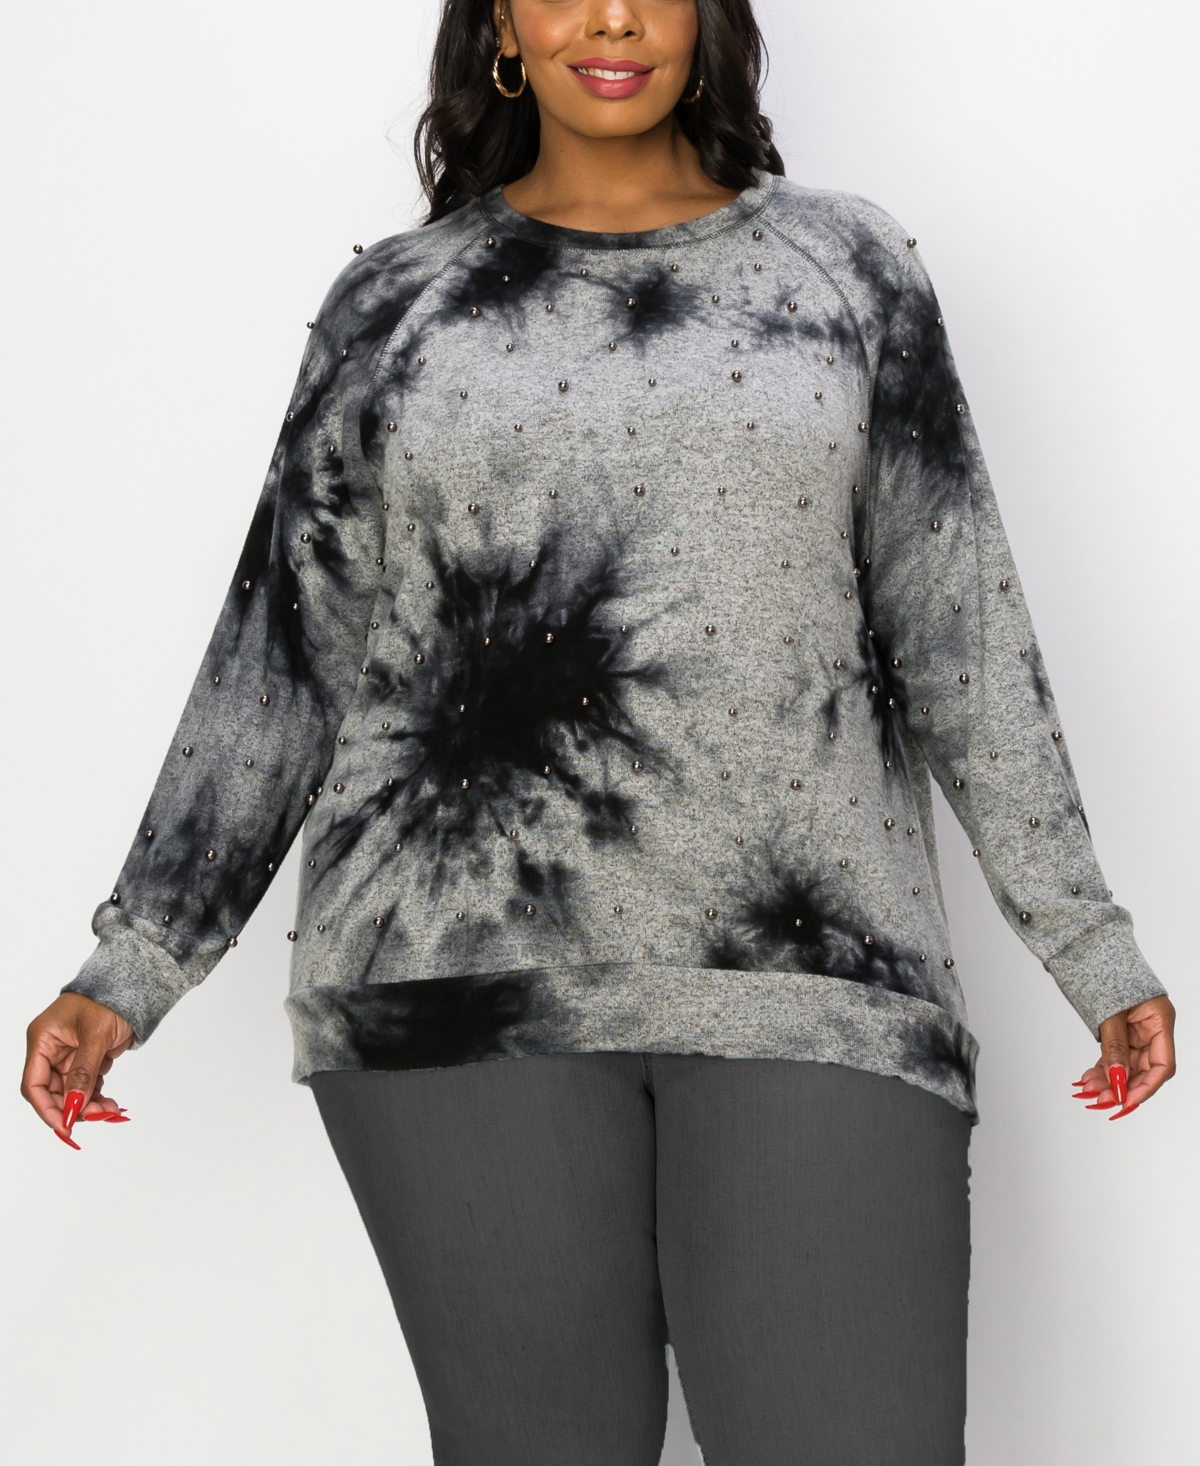 Coin 1804 Plus Size Cozy Long Sleeve Pullover Top With Gunmetal Studs In Gray Black